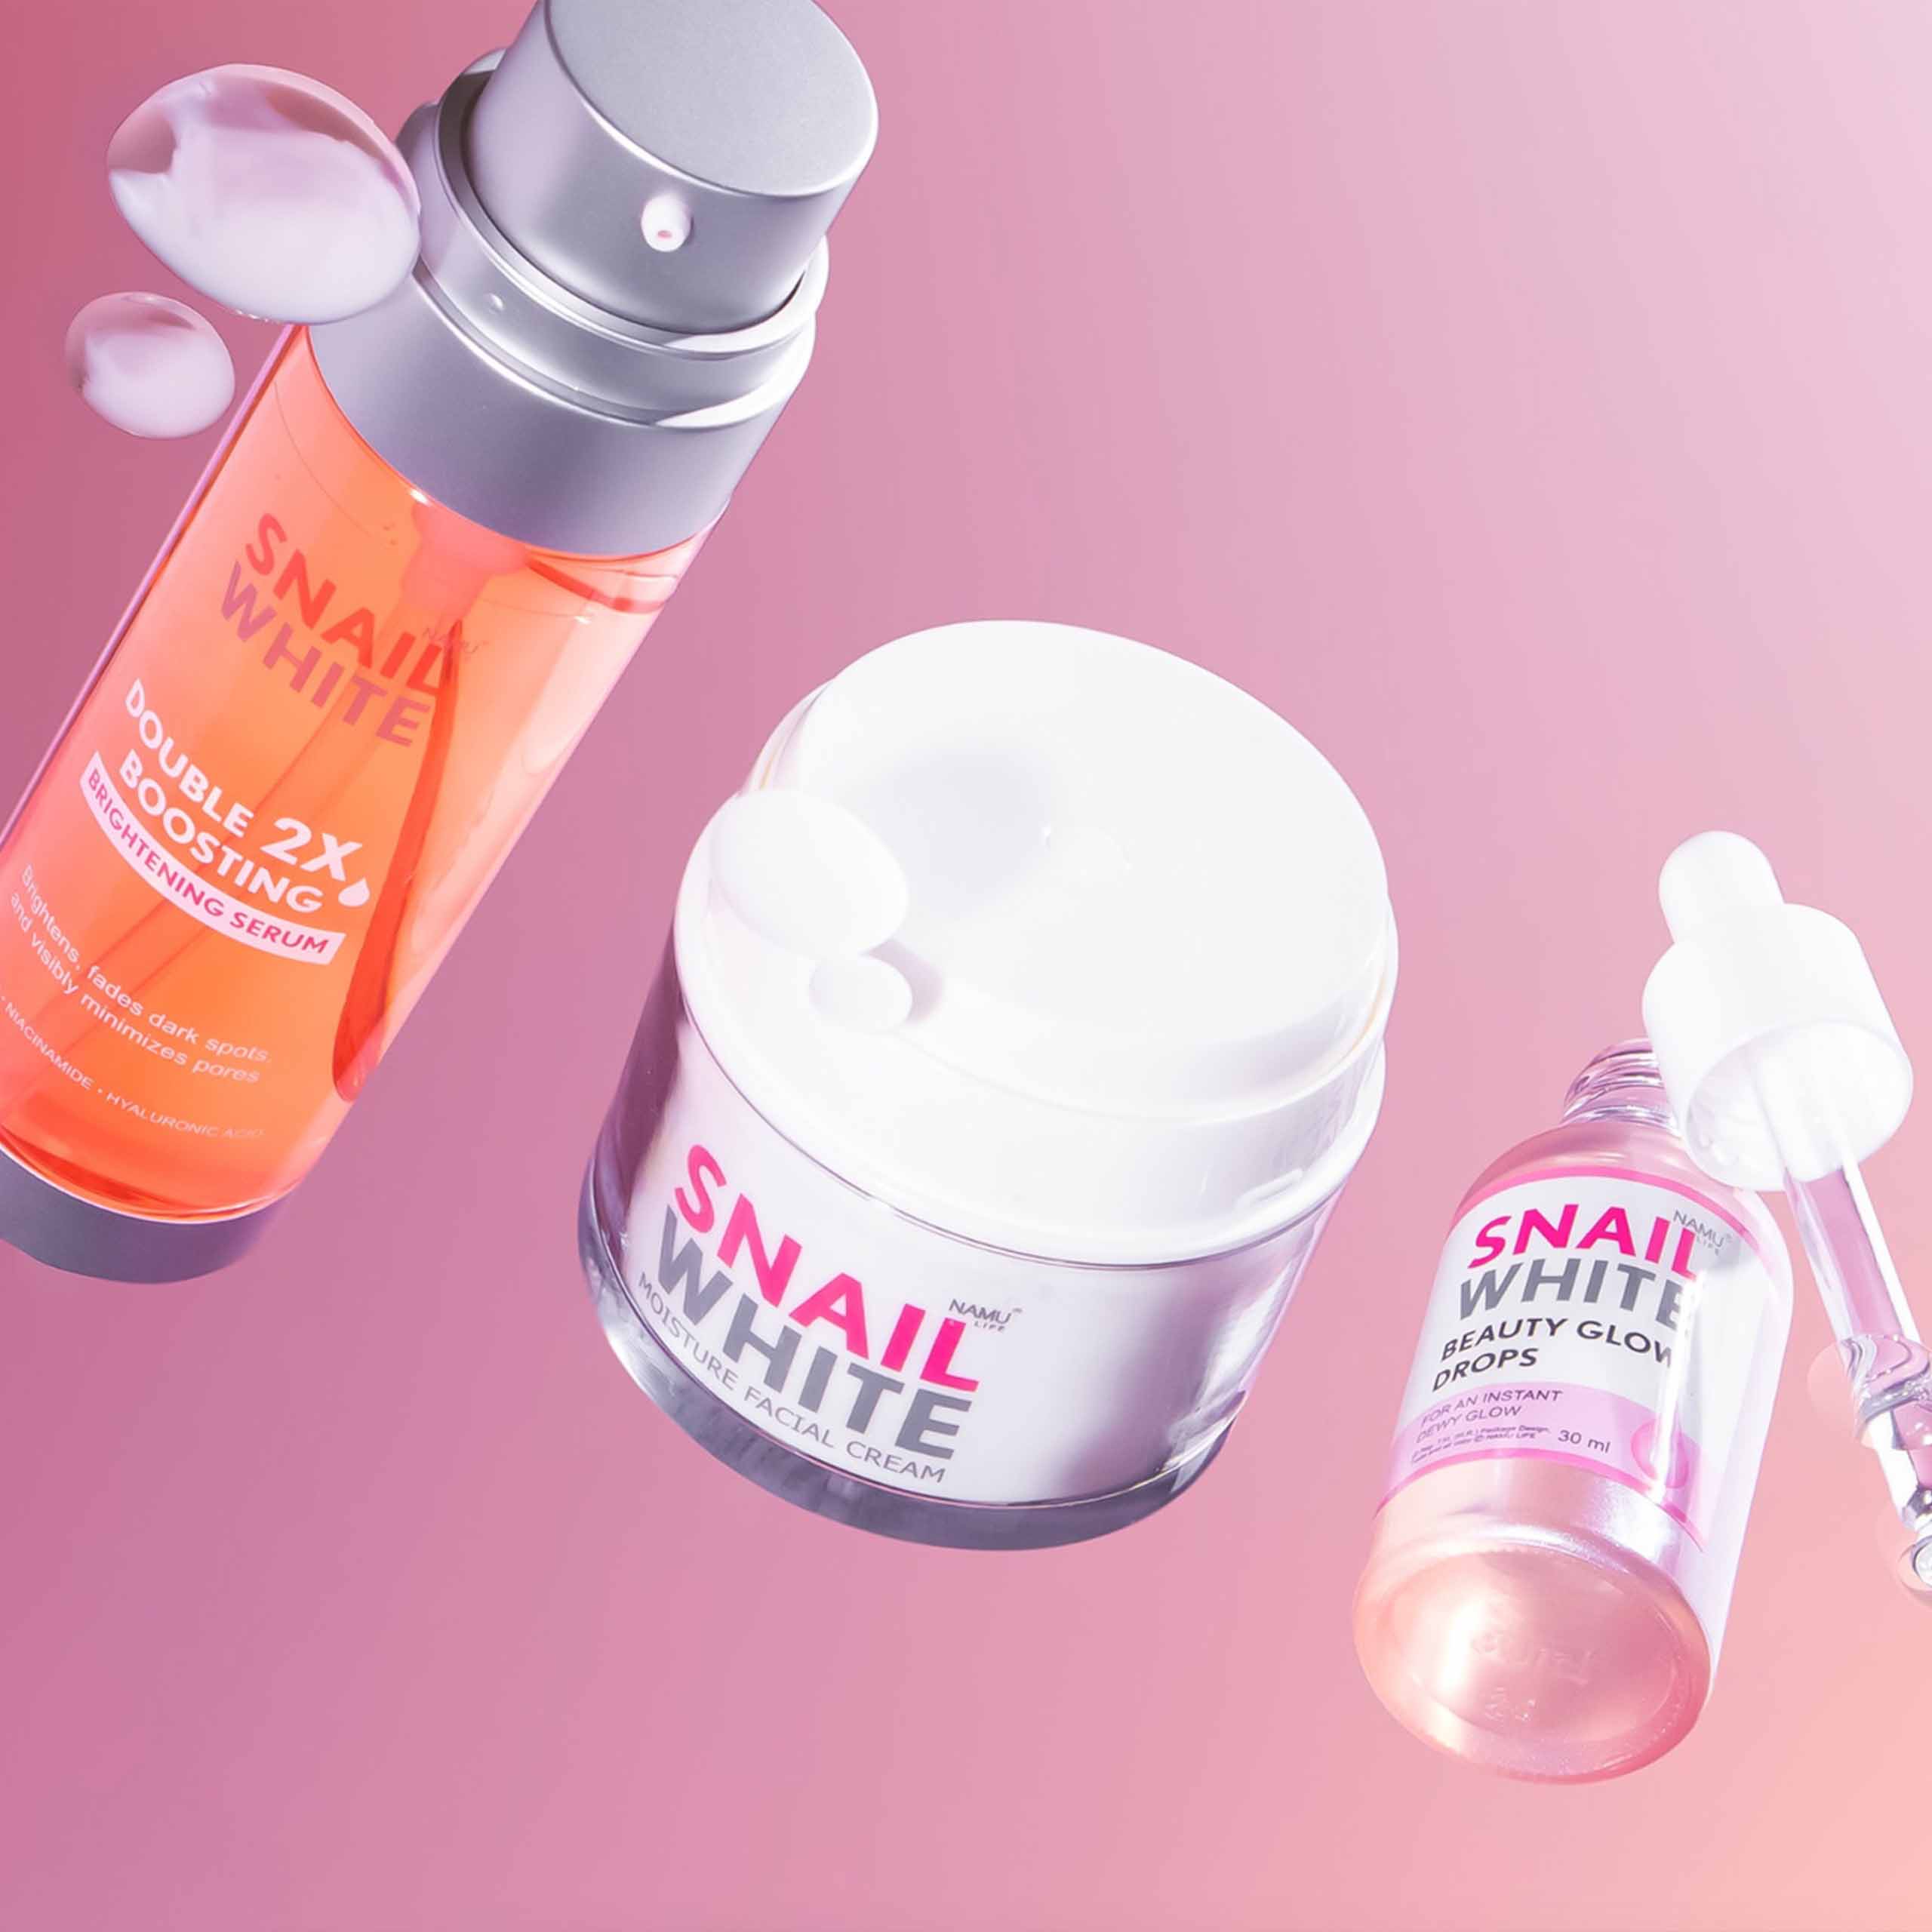 Five Years of Glow: How SNAILWHITE Unlocked A Head-to-Toe Radiance for All Filipinas